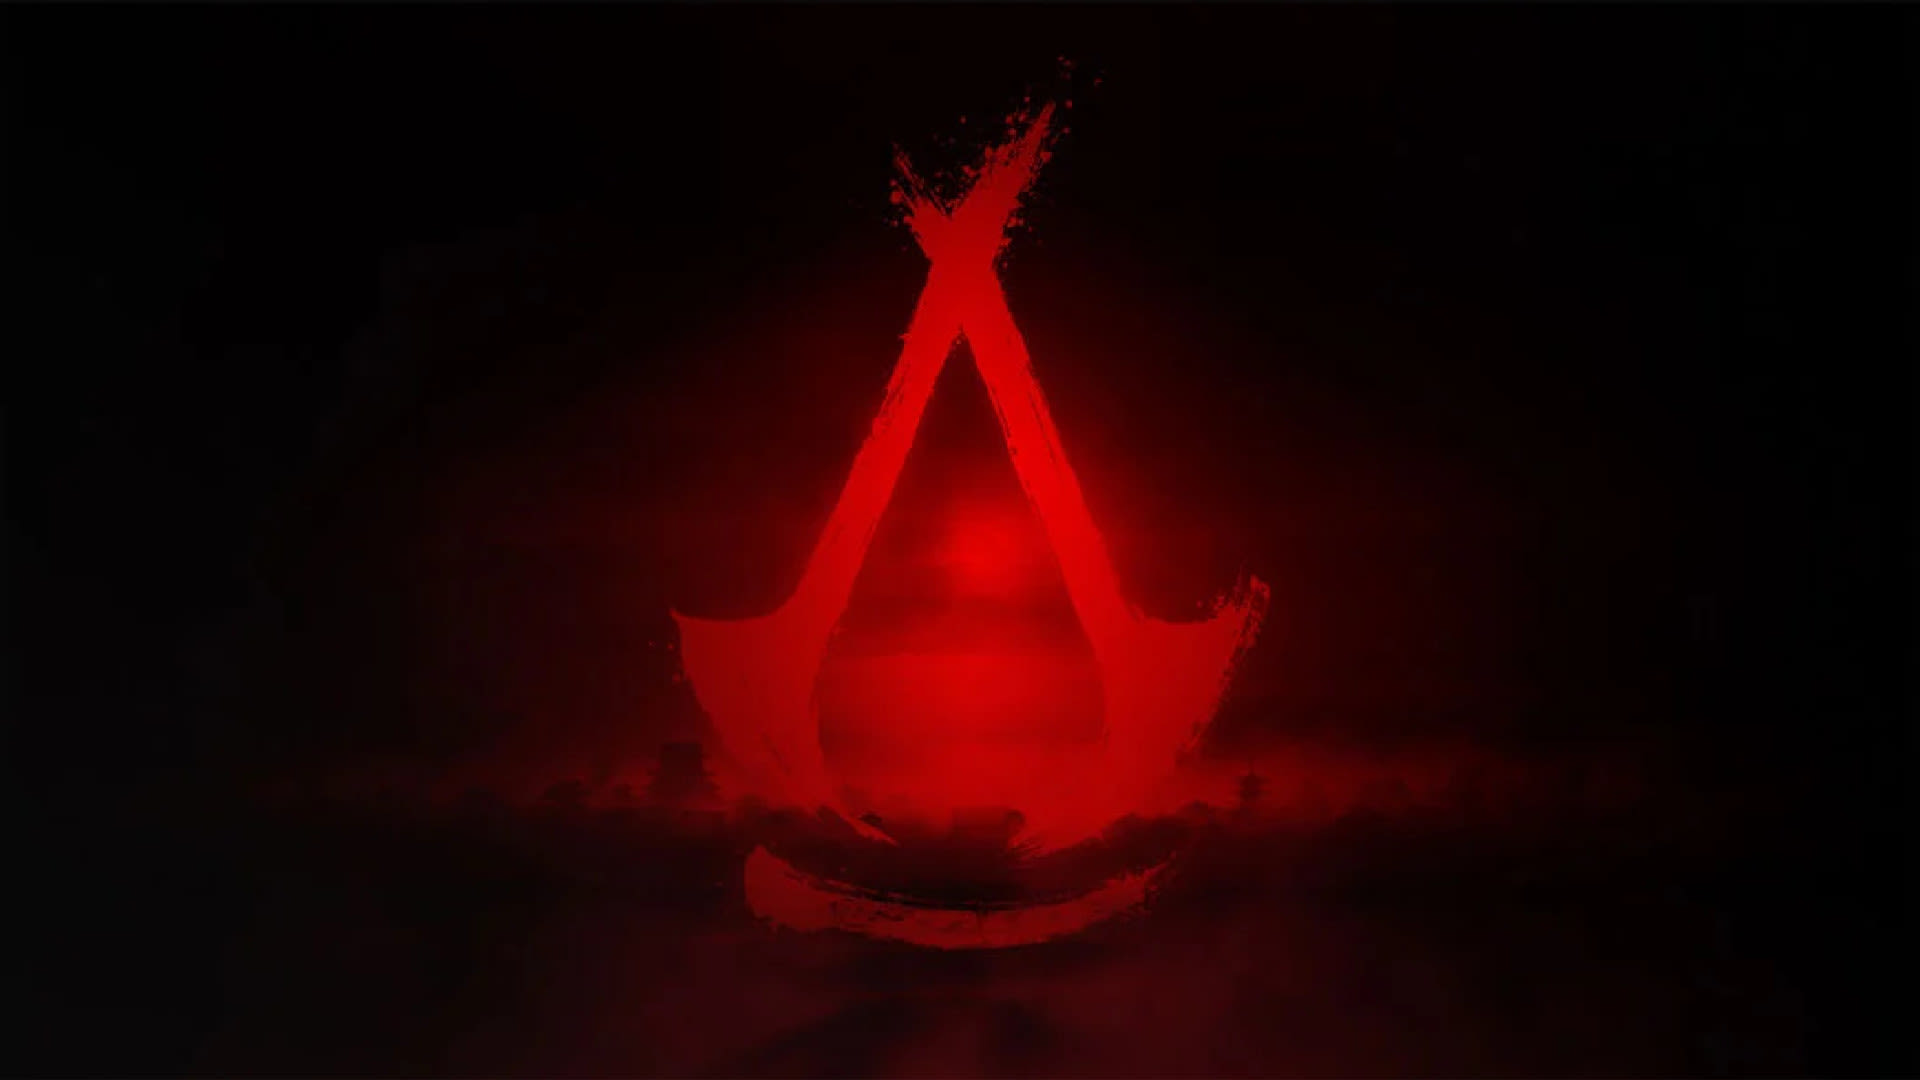 Assassin's Creed Shadows release date seemingly leaked by Ubisoft in its own trailer placeholder